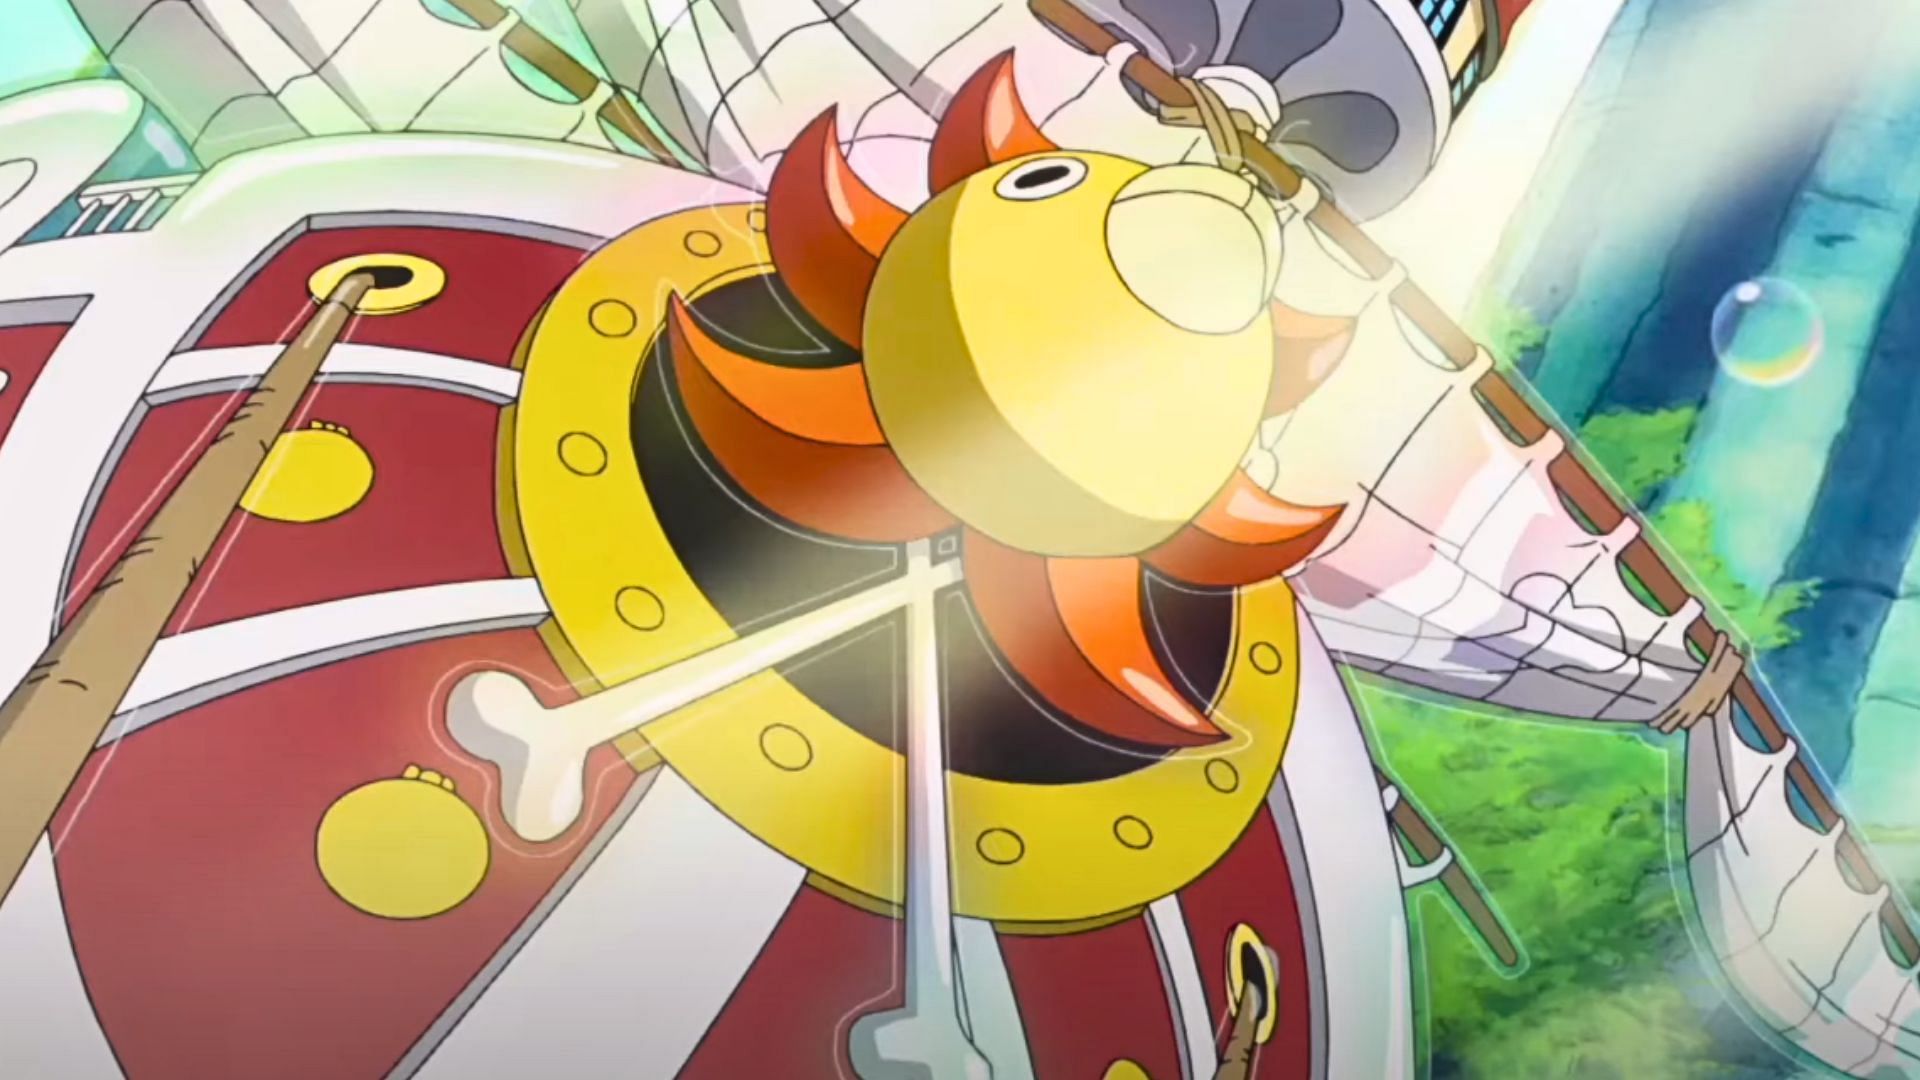 The Thousand Sunny as seen in One Piece (Image via Toei Animation)